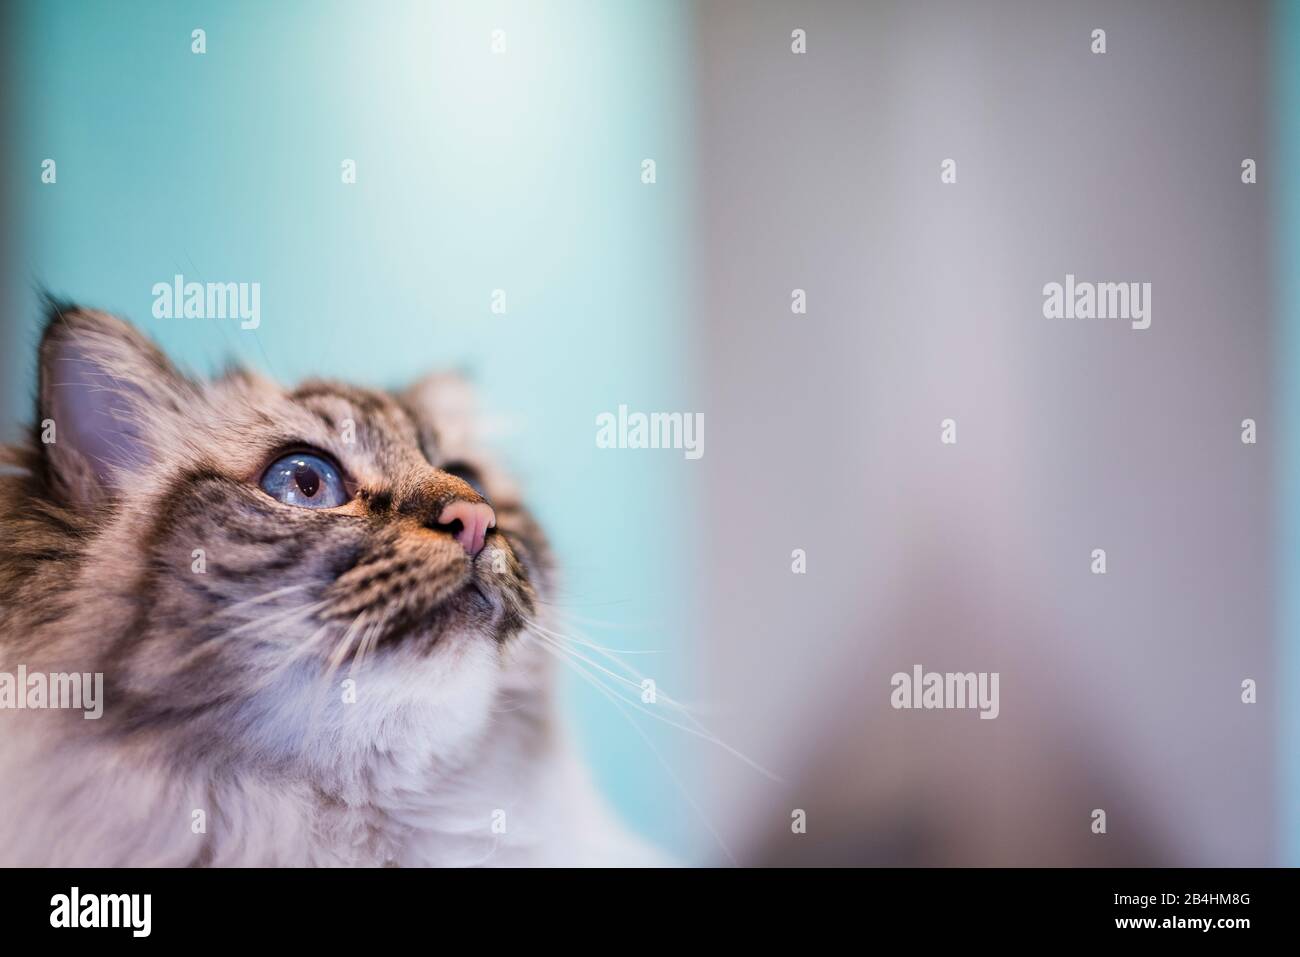 Birman cat in a bright room with turquoise walls Stock Photo